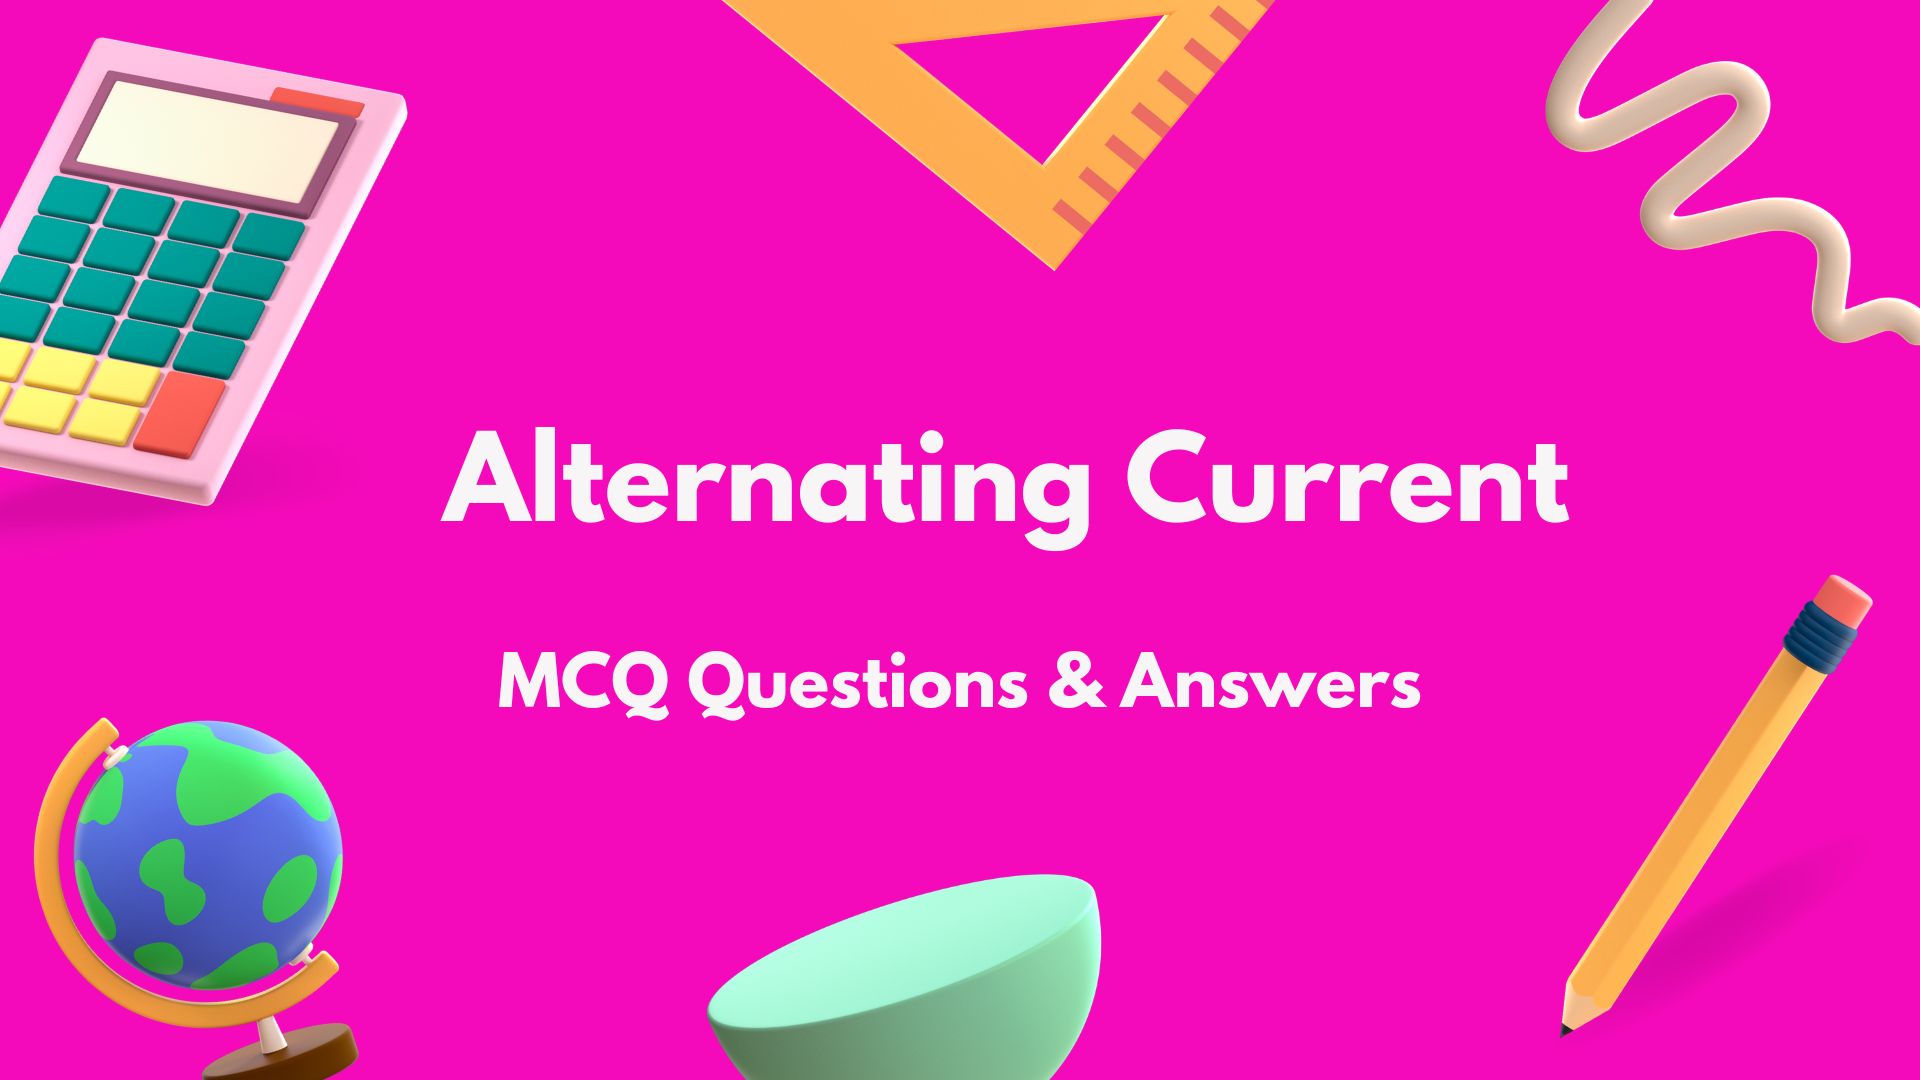 Alternating Current MCQ Questions and Answers